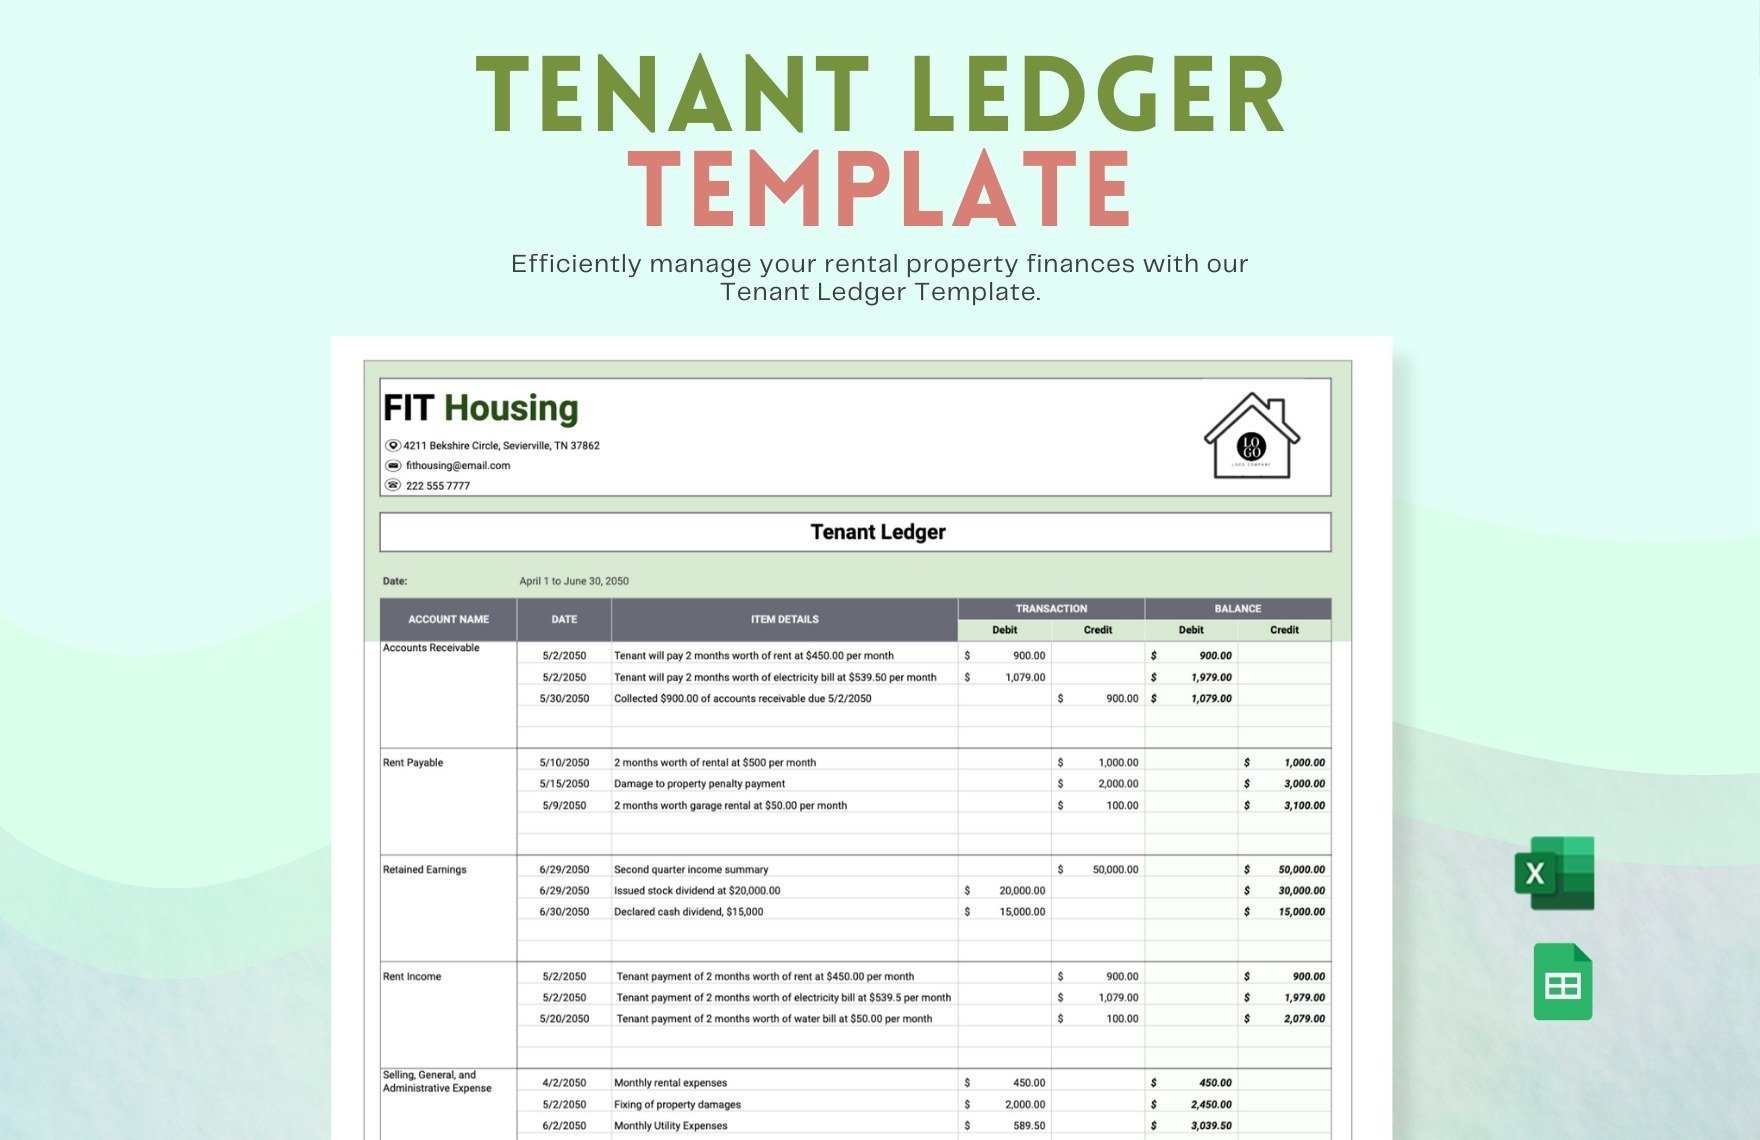 Tenant Ledger Template in Excel, Google Sheets